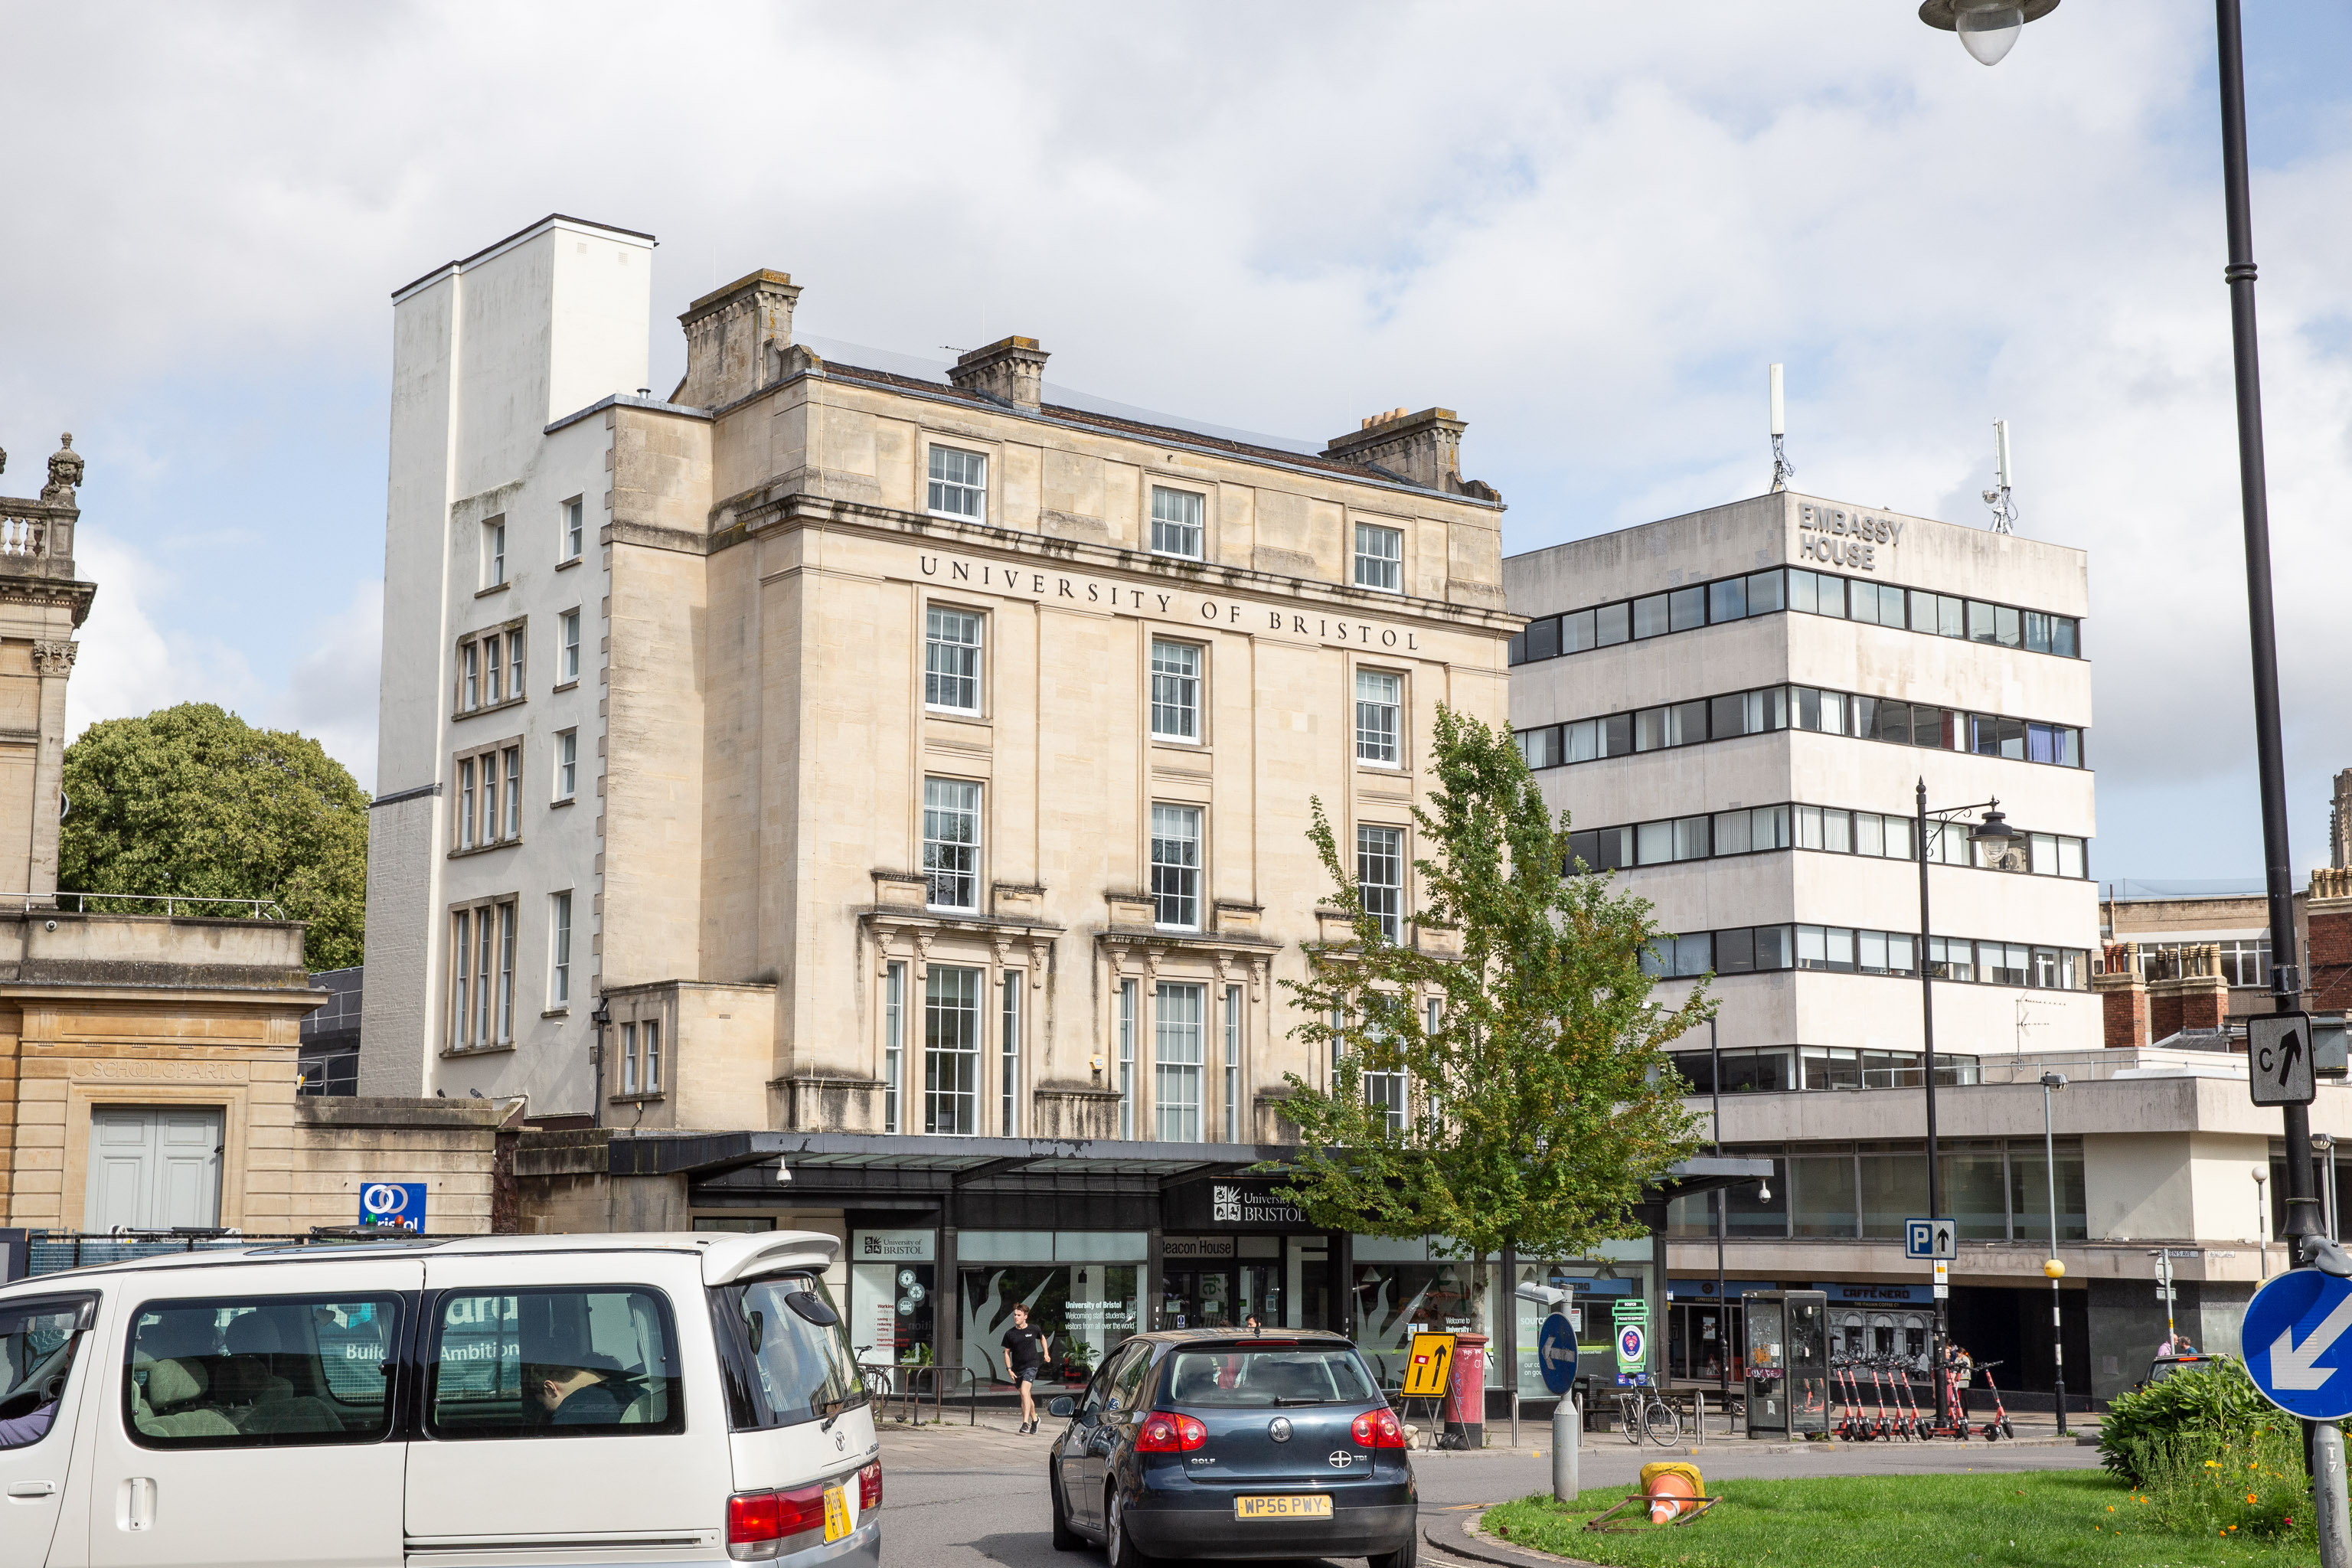 Beacon House
Currently the University of Bristol's Beacon House, it was originally the Queens Hotel, built by William Bateman Reed, who also built a stretch of...